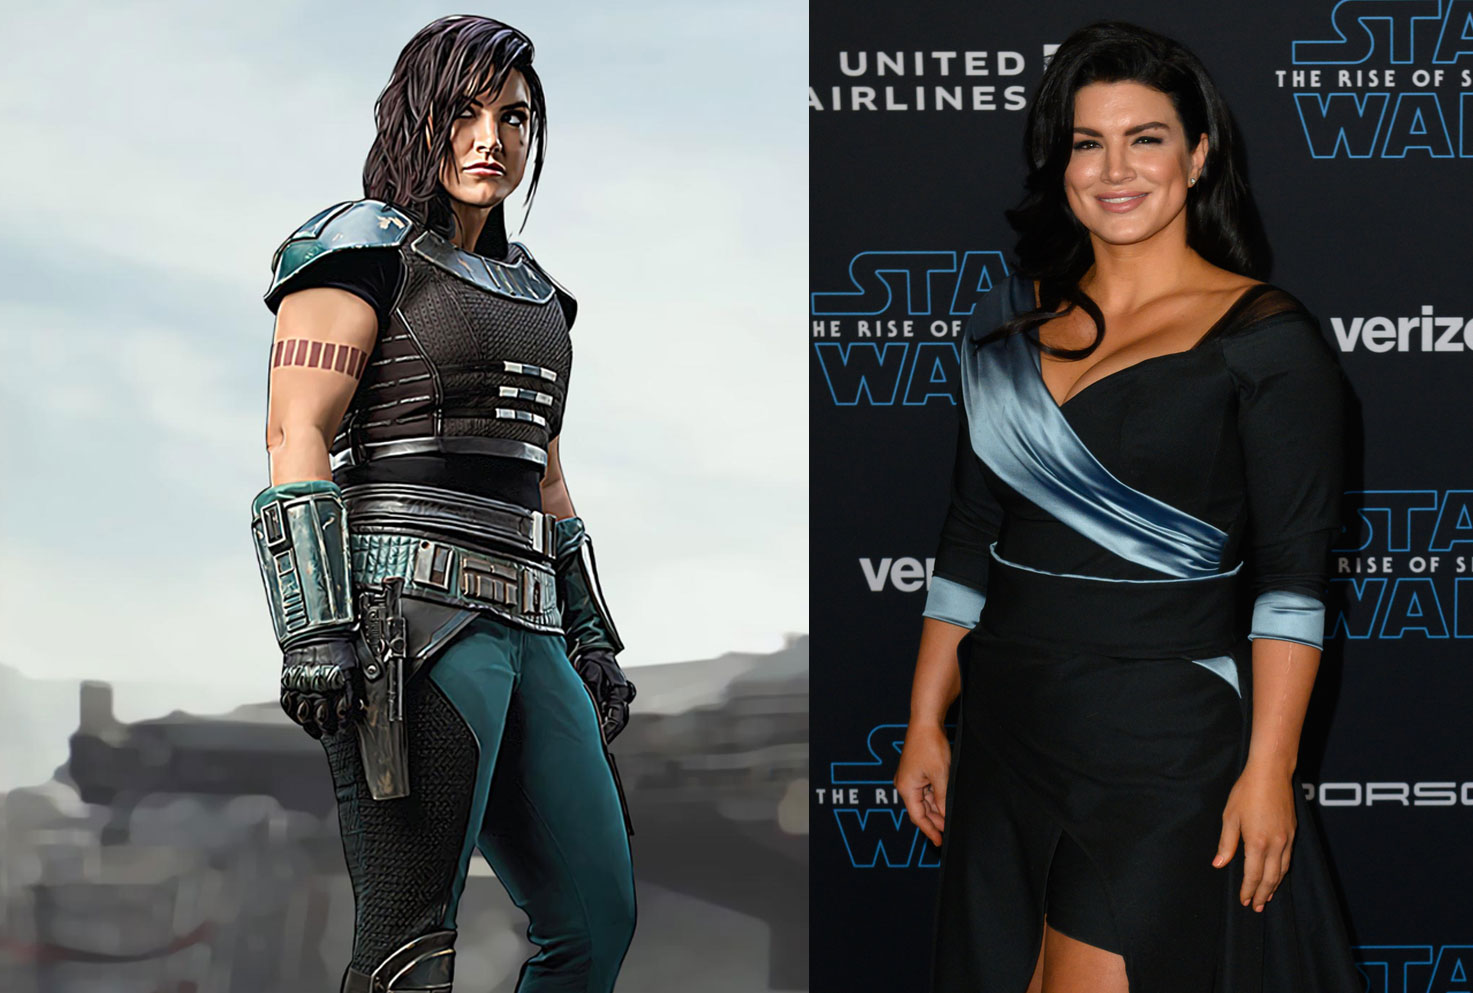 Gina Carano is no longer a part of The Mandalorian, or any other Lucasfilm ...